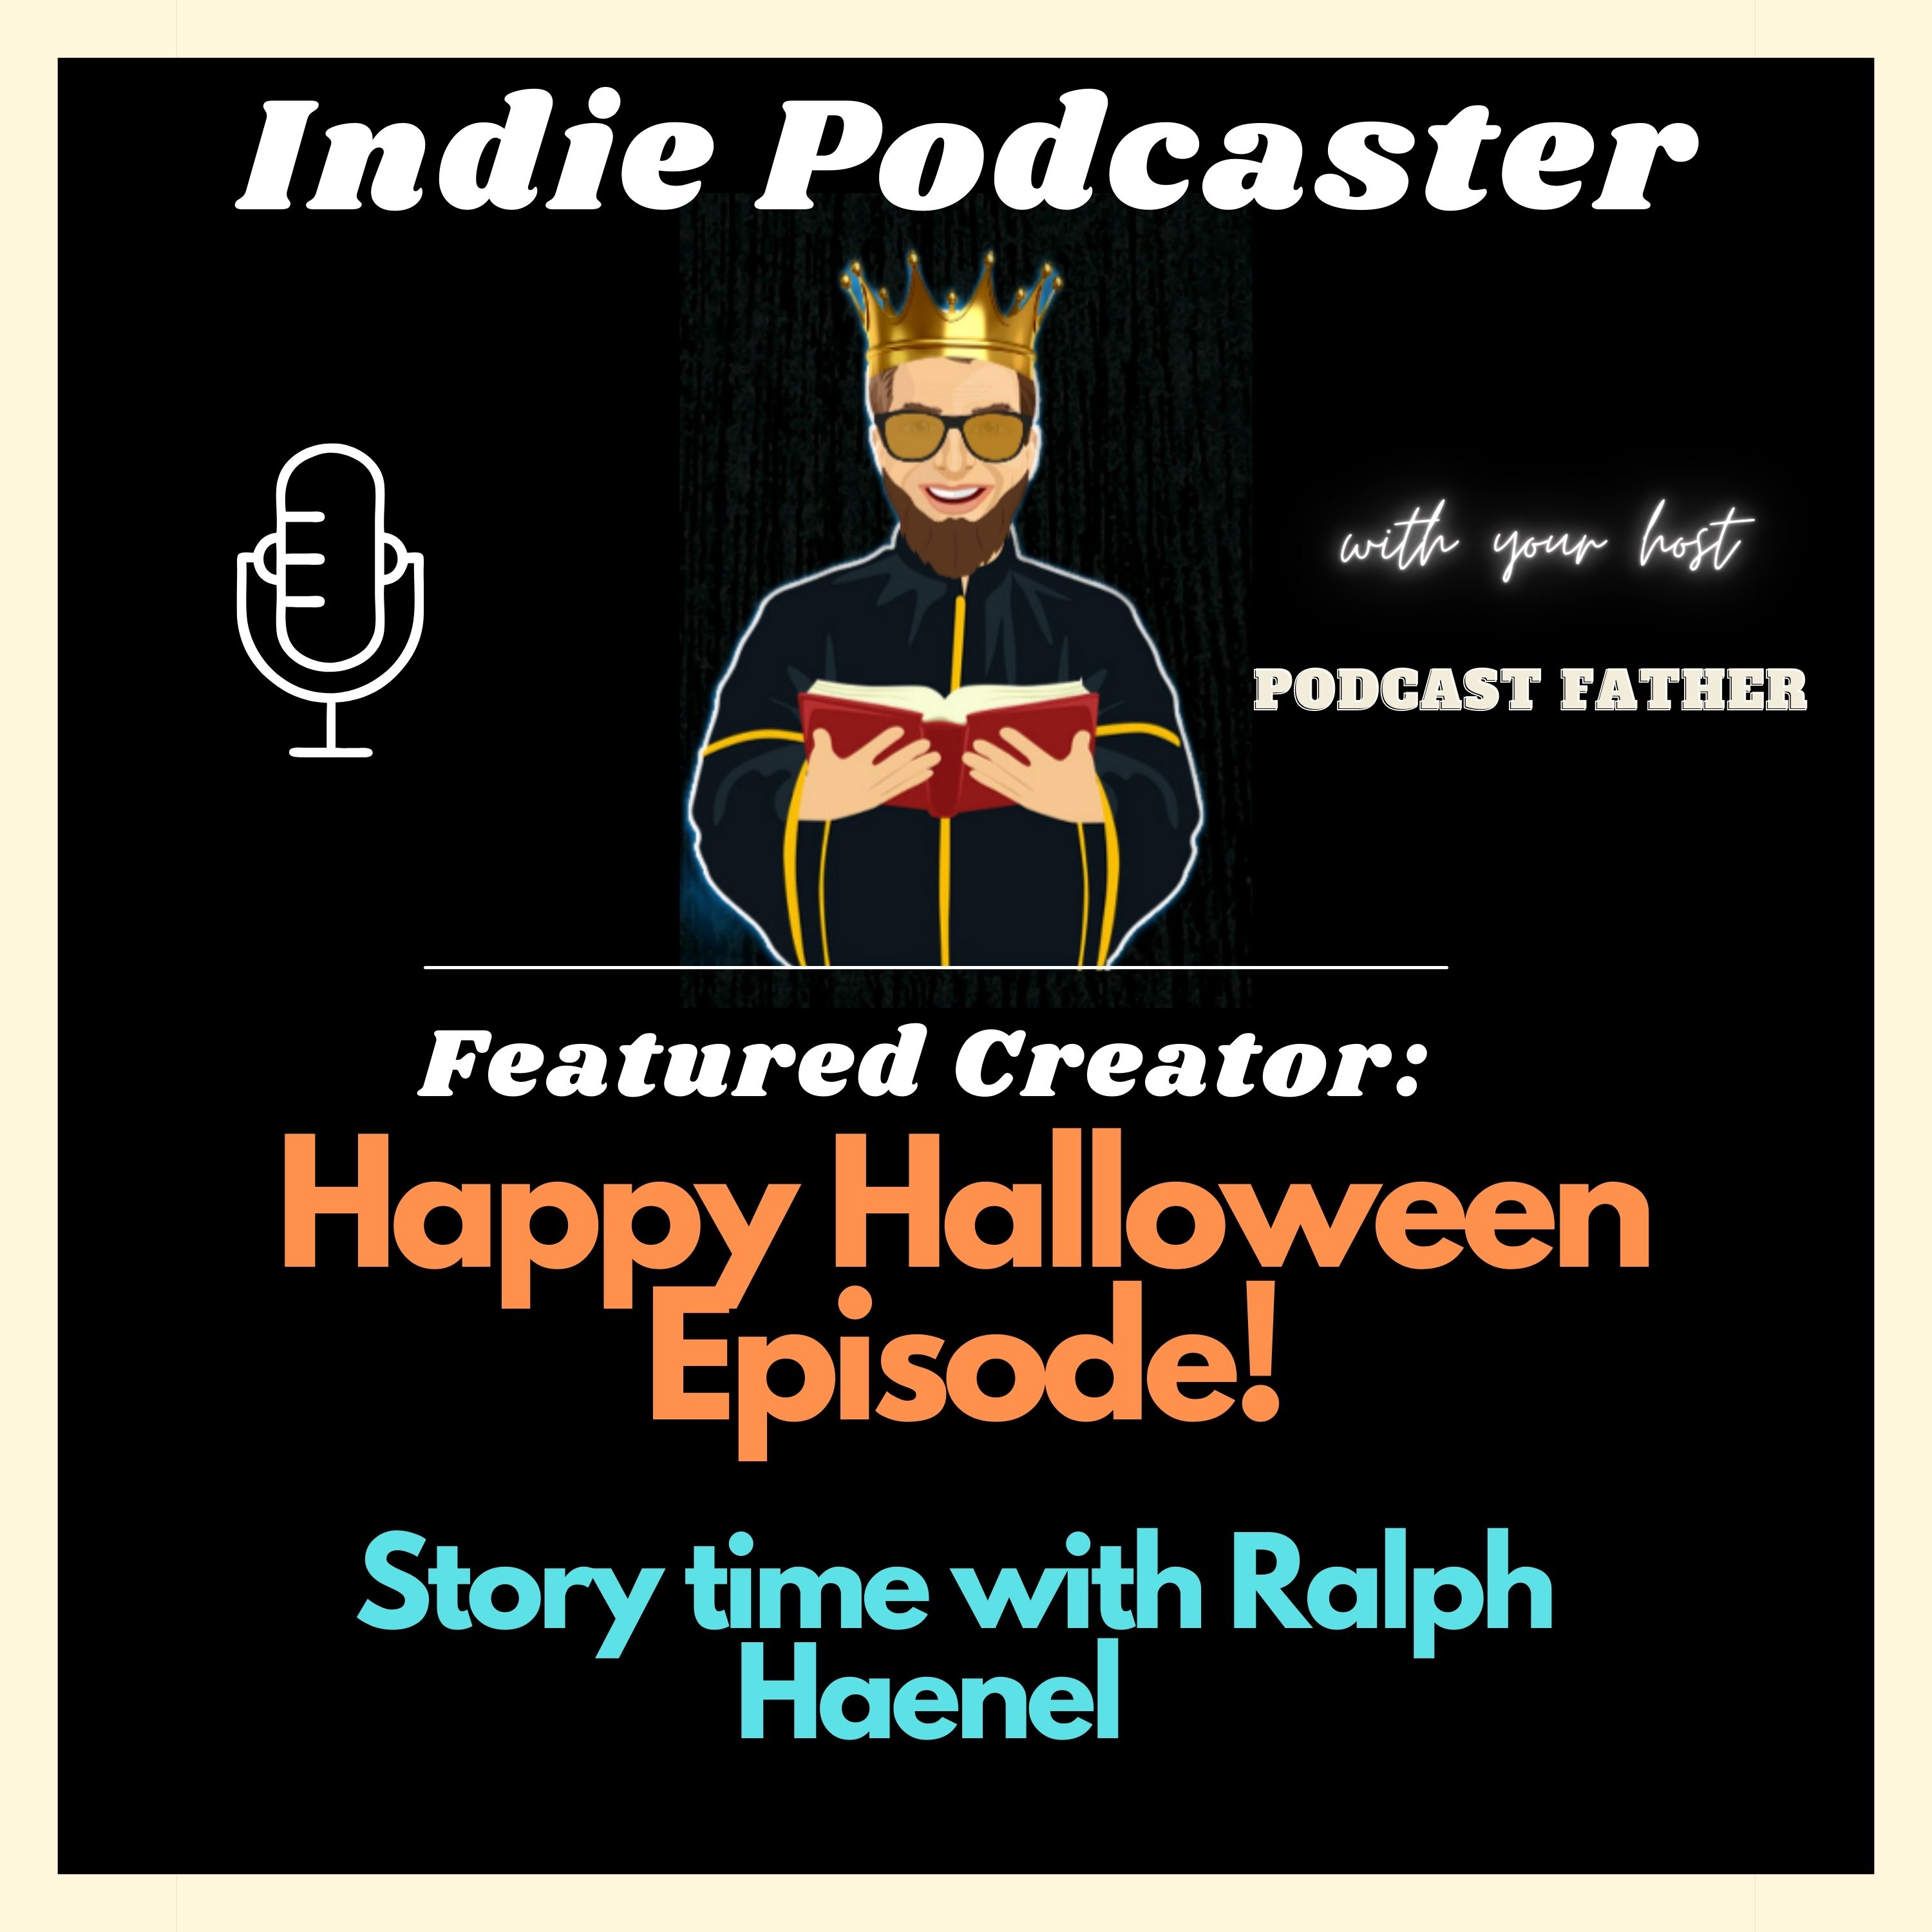 Ralph Haenel shares his "spooky" stories for Halloween Image